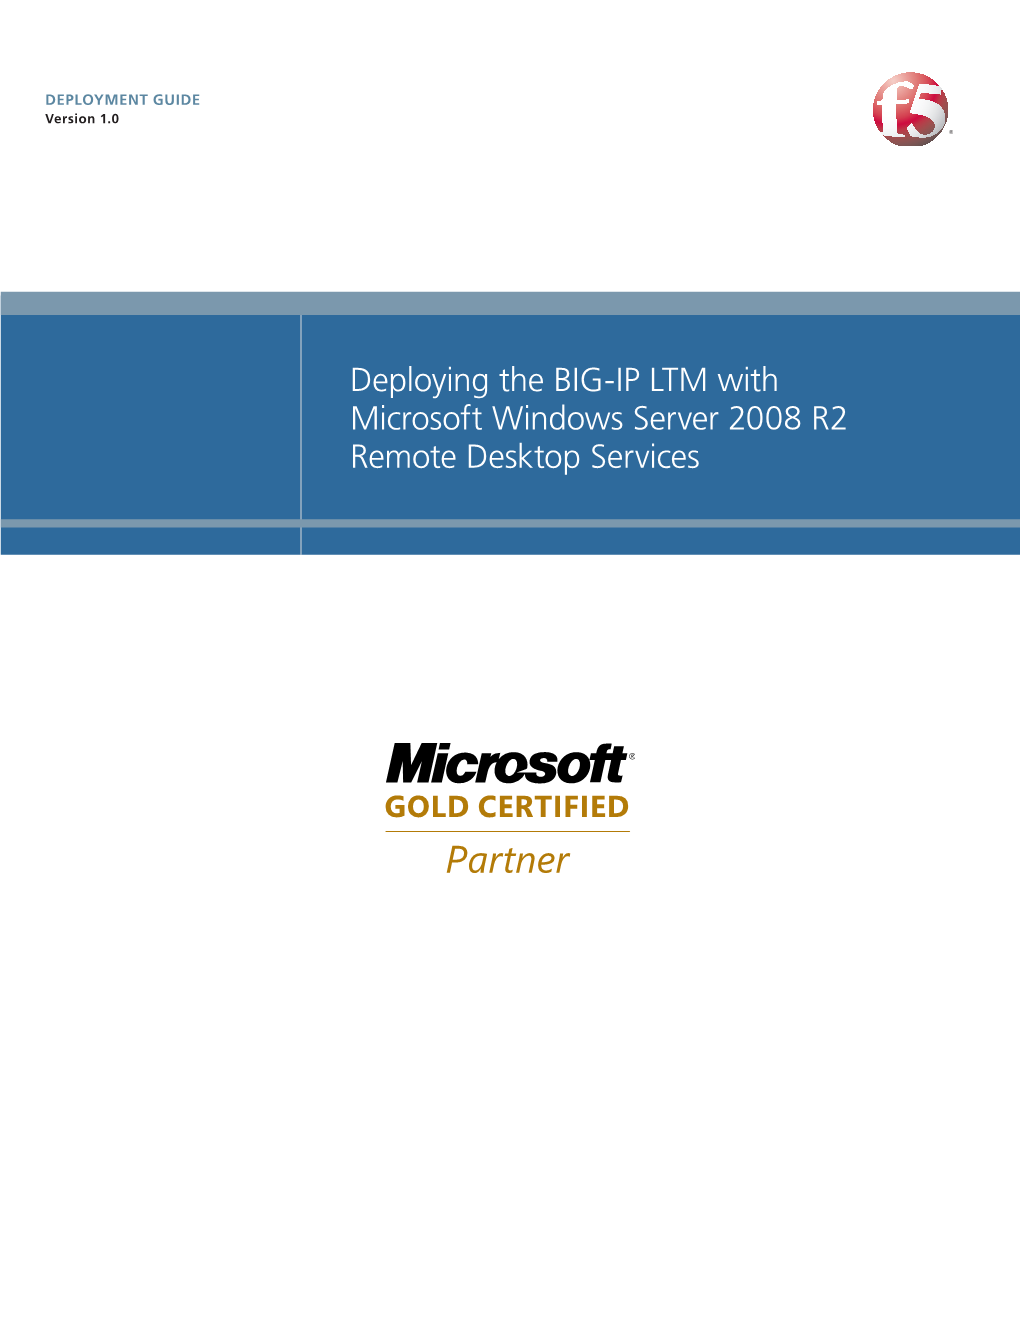 Deploying the BIG-IP LTM System with Microsoft Remote Desktop Services